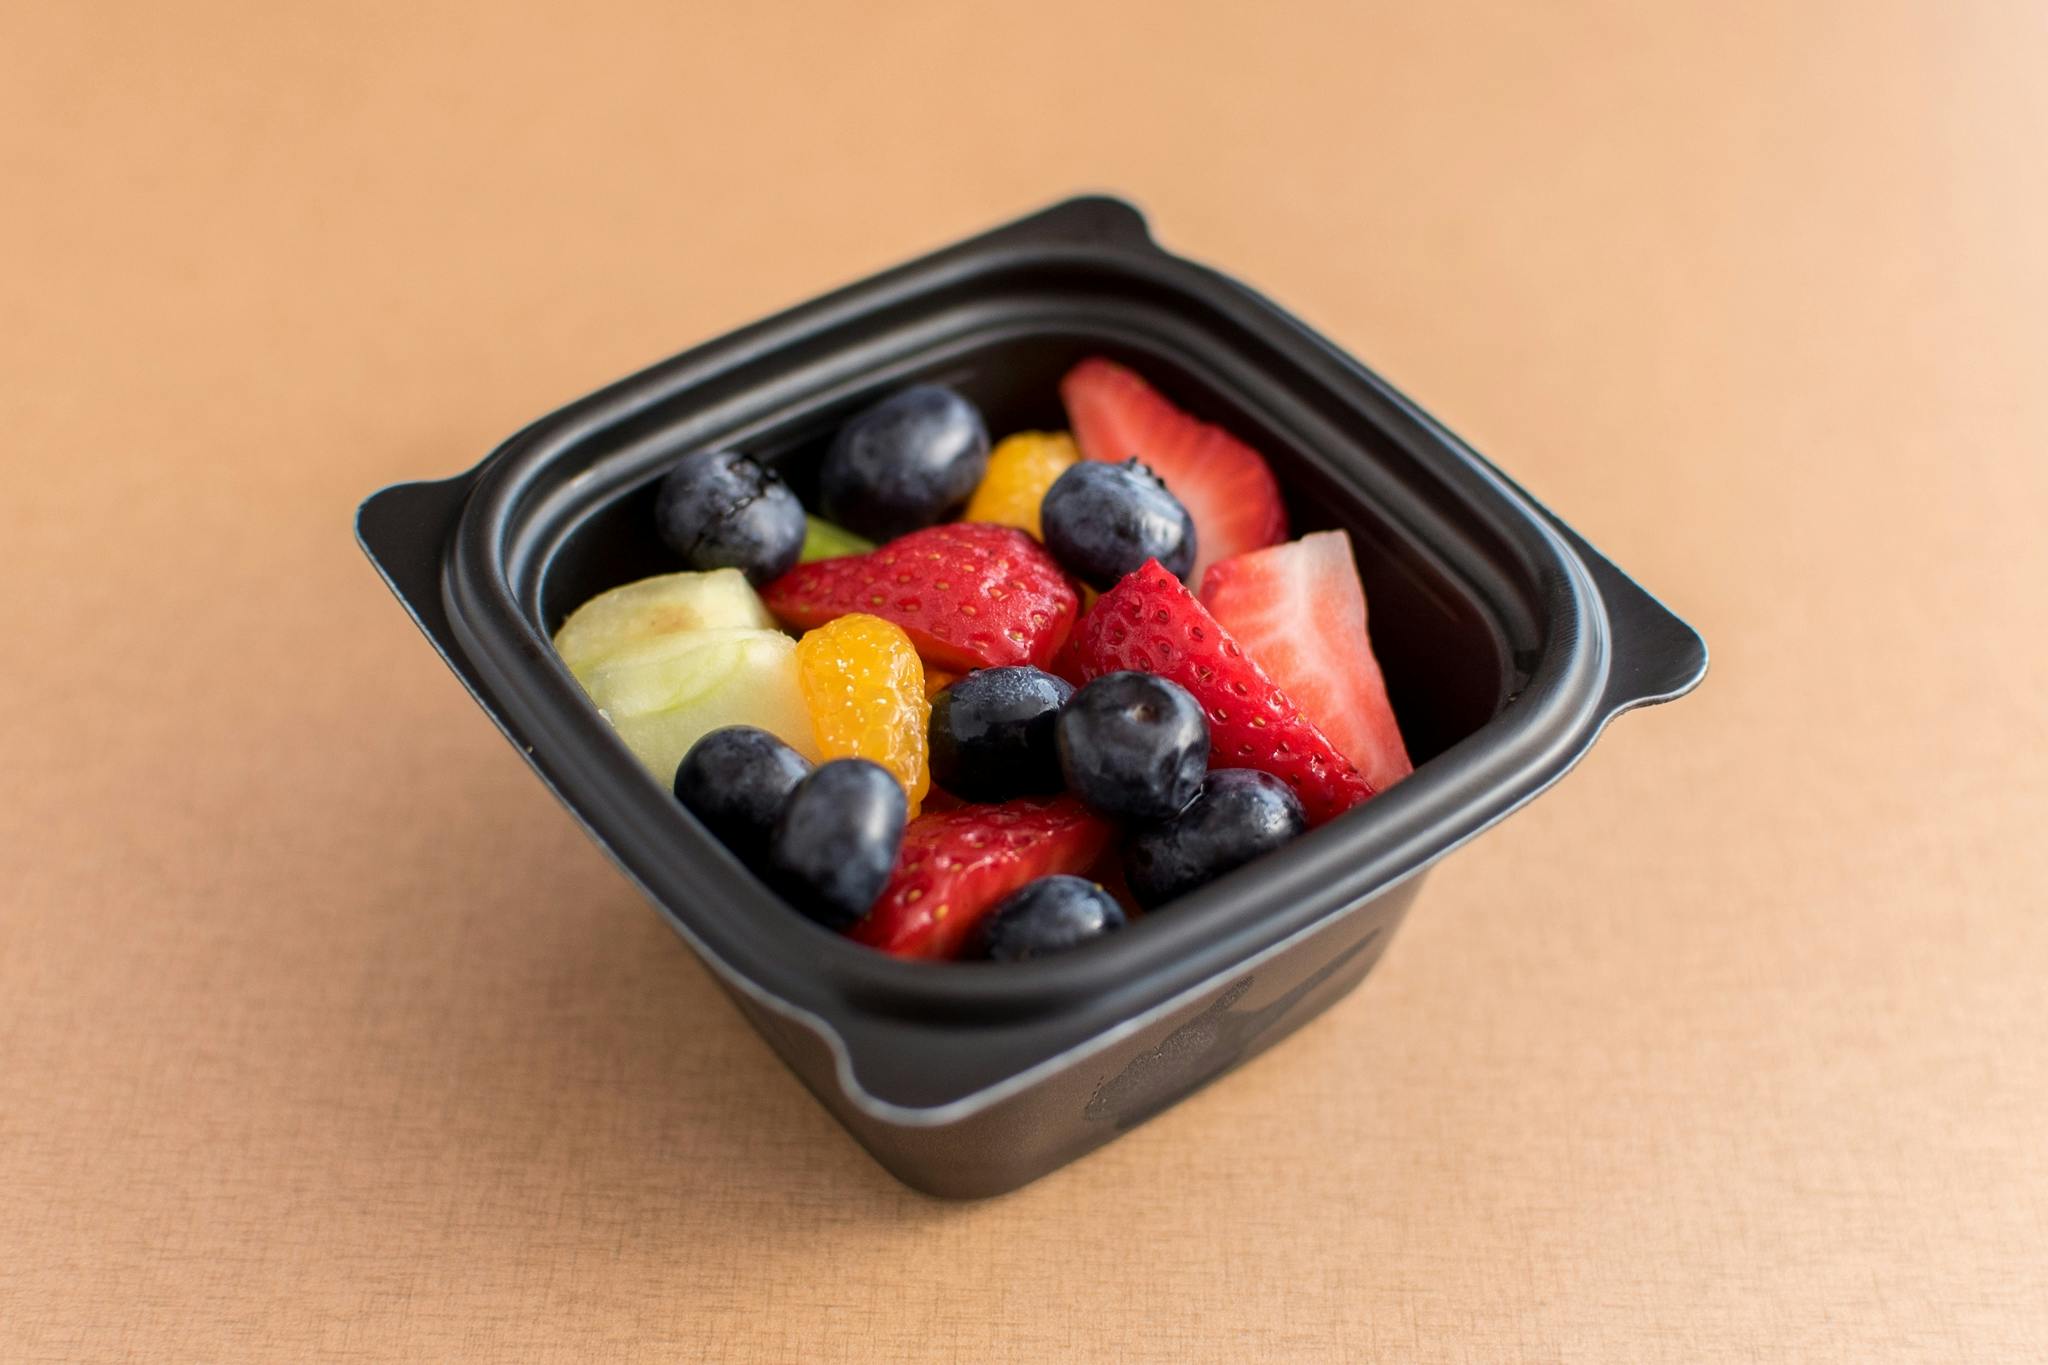 Pick Up Fruit Cup from Chick-fil-A in Colonial Heights, VA